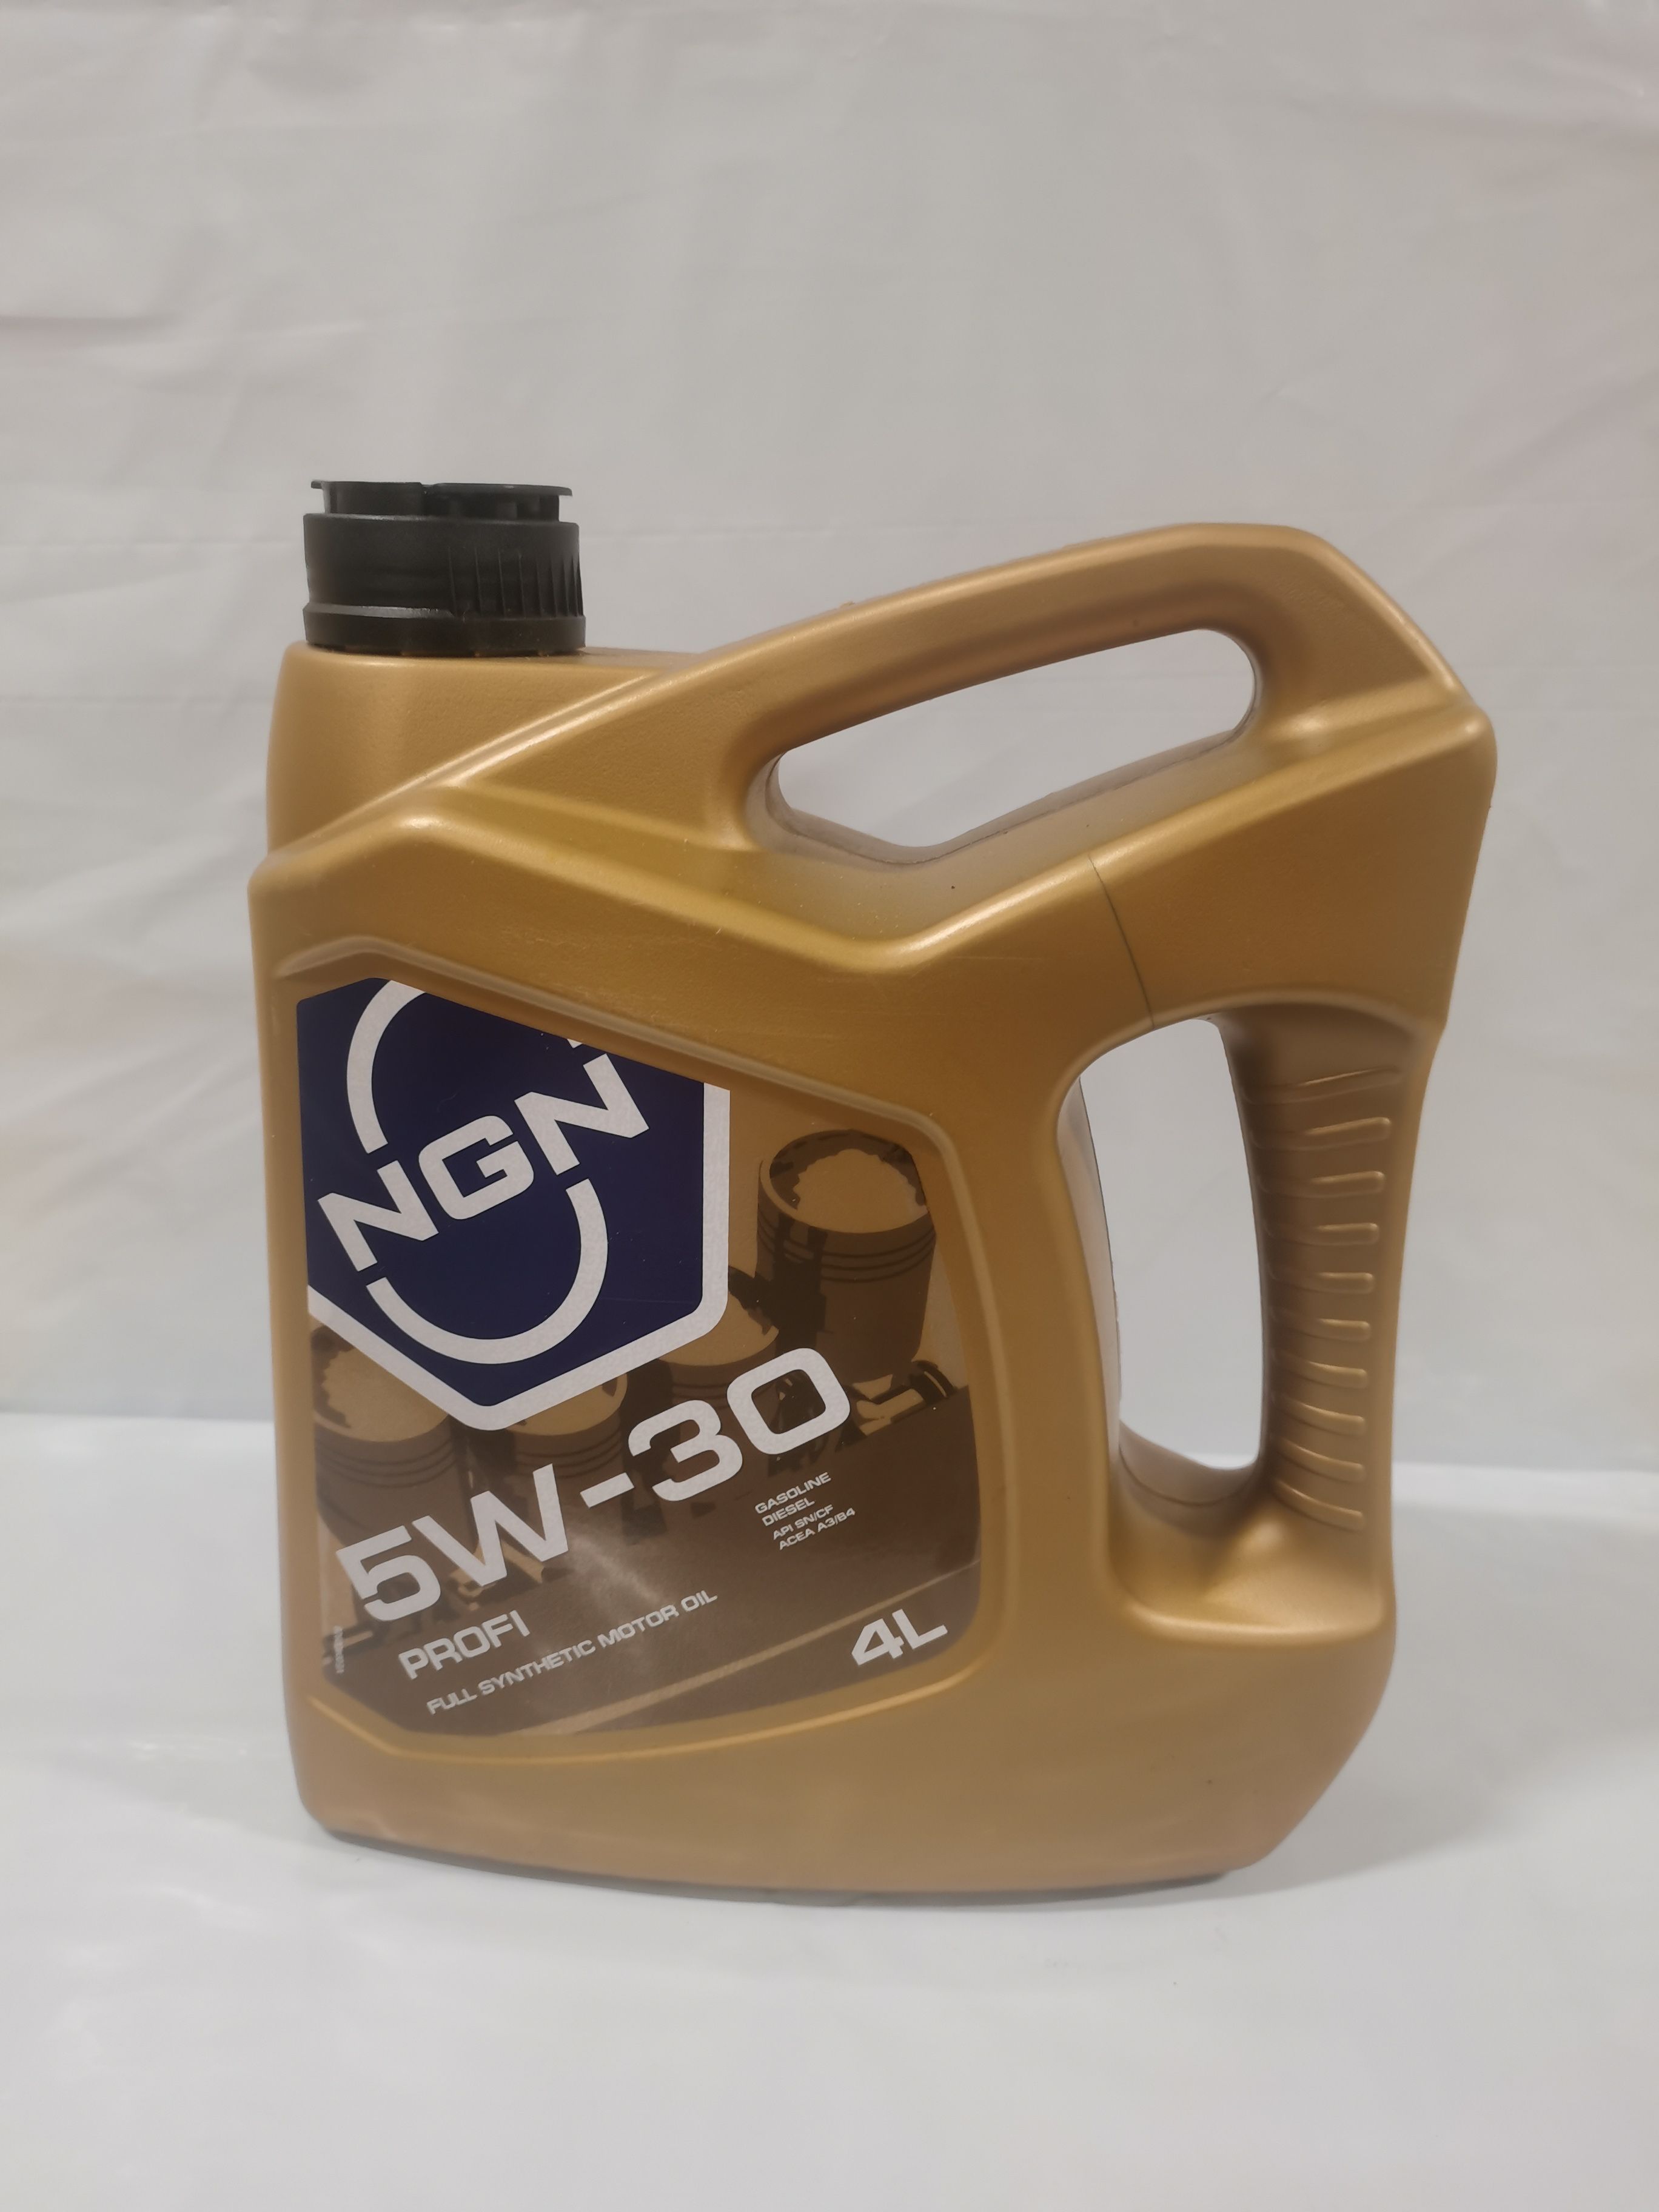 Масло ngn 5w 30. NGN 5w30. NGN Diesel syn 5w-40. Масло NGN 5w30 синтетика.